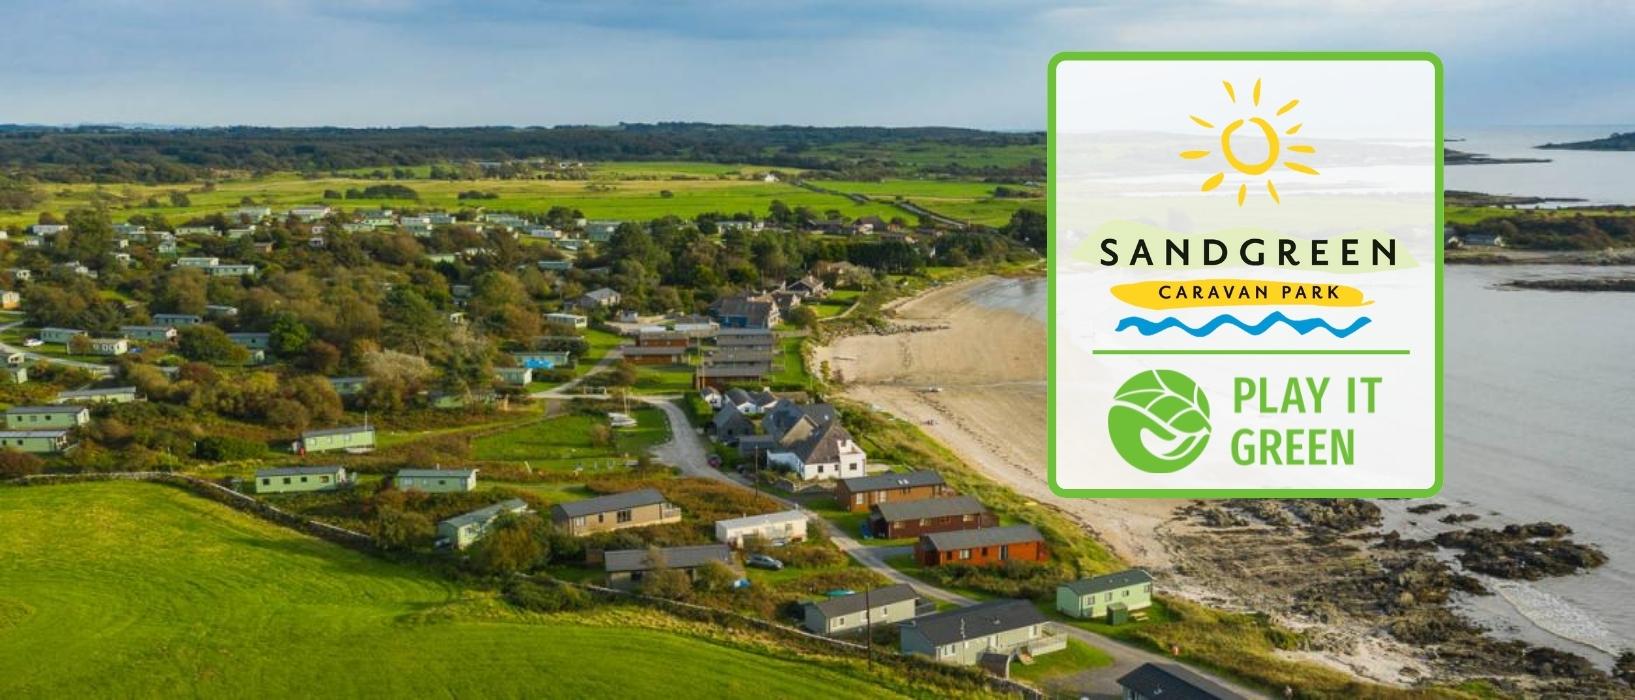 aerial view of small caravan park next to coast, Play it Green and Sandgreen Caravan Park logos placed together in front